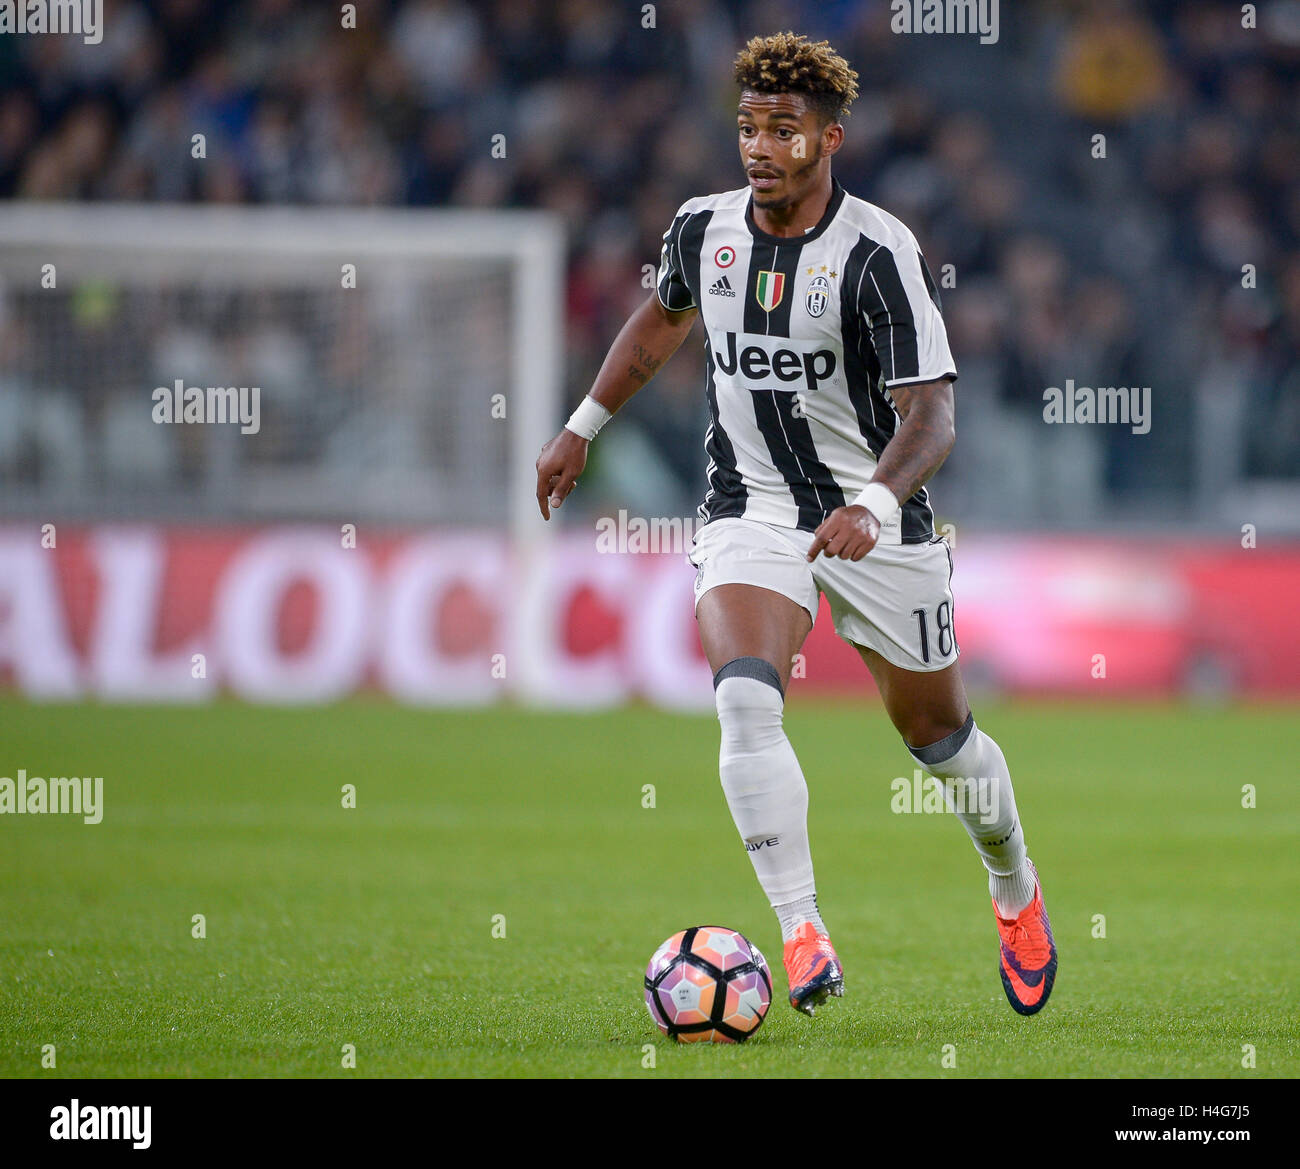 Turin, Italy, 15 october 2016: Mario Lemina of Juventus FC in action during  the Serie A football match between Juventus FC and Udinese Calcio. Credit:  Nicolò Campo/Alamy Live News Stock Photo - Alamy